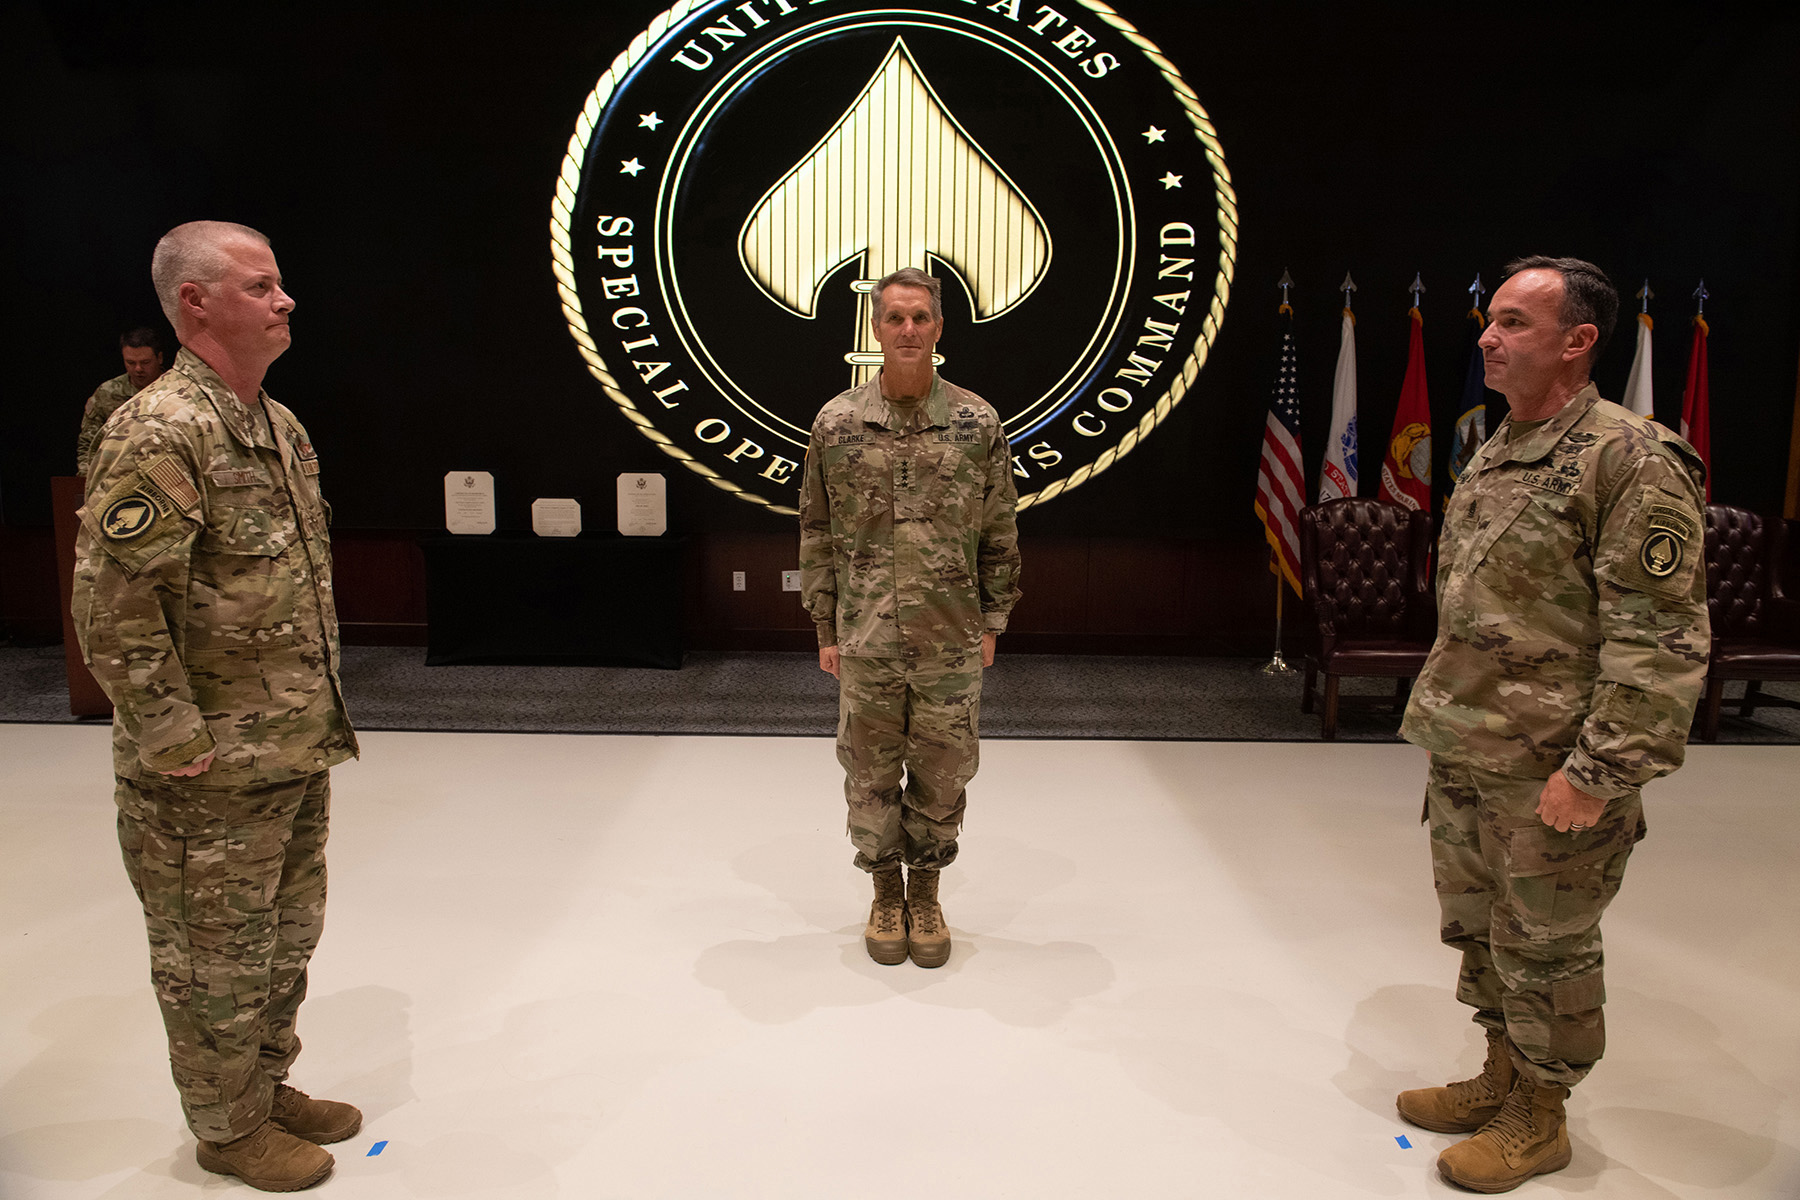 After serving three years as the Command Senior Enlisted Leader of U.S. Special Operations Command, Command Chief Master Sgt. Gr